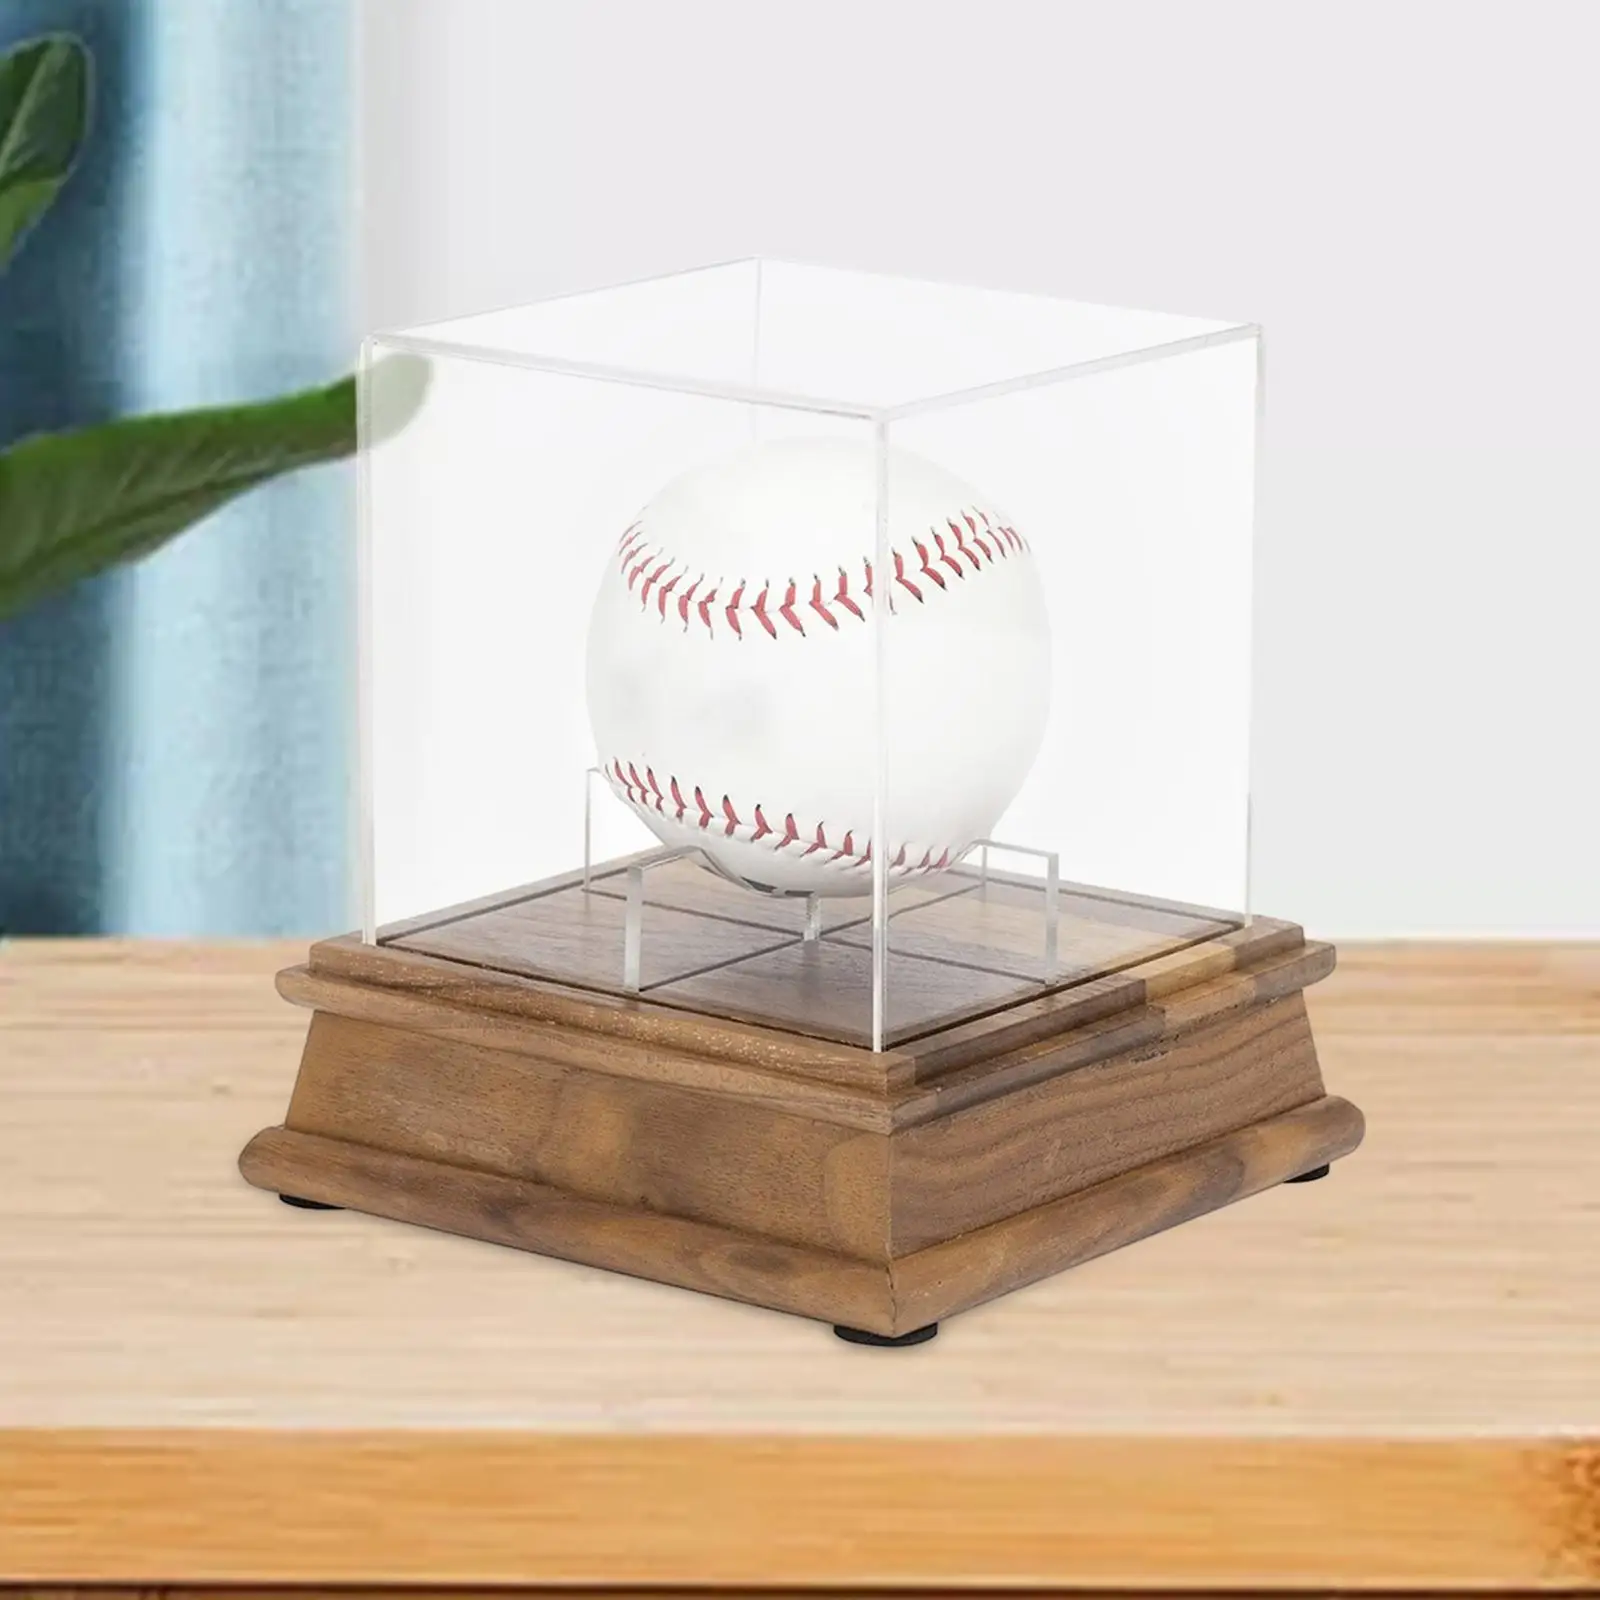 

Baseball Display Case for Official Size Baseball Acrylic Transparent for Autographed Balls Dustproof Protection Baseball Holder